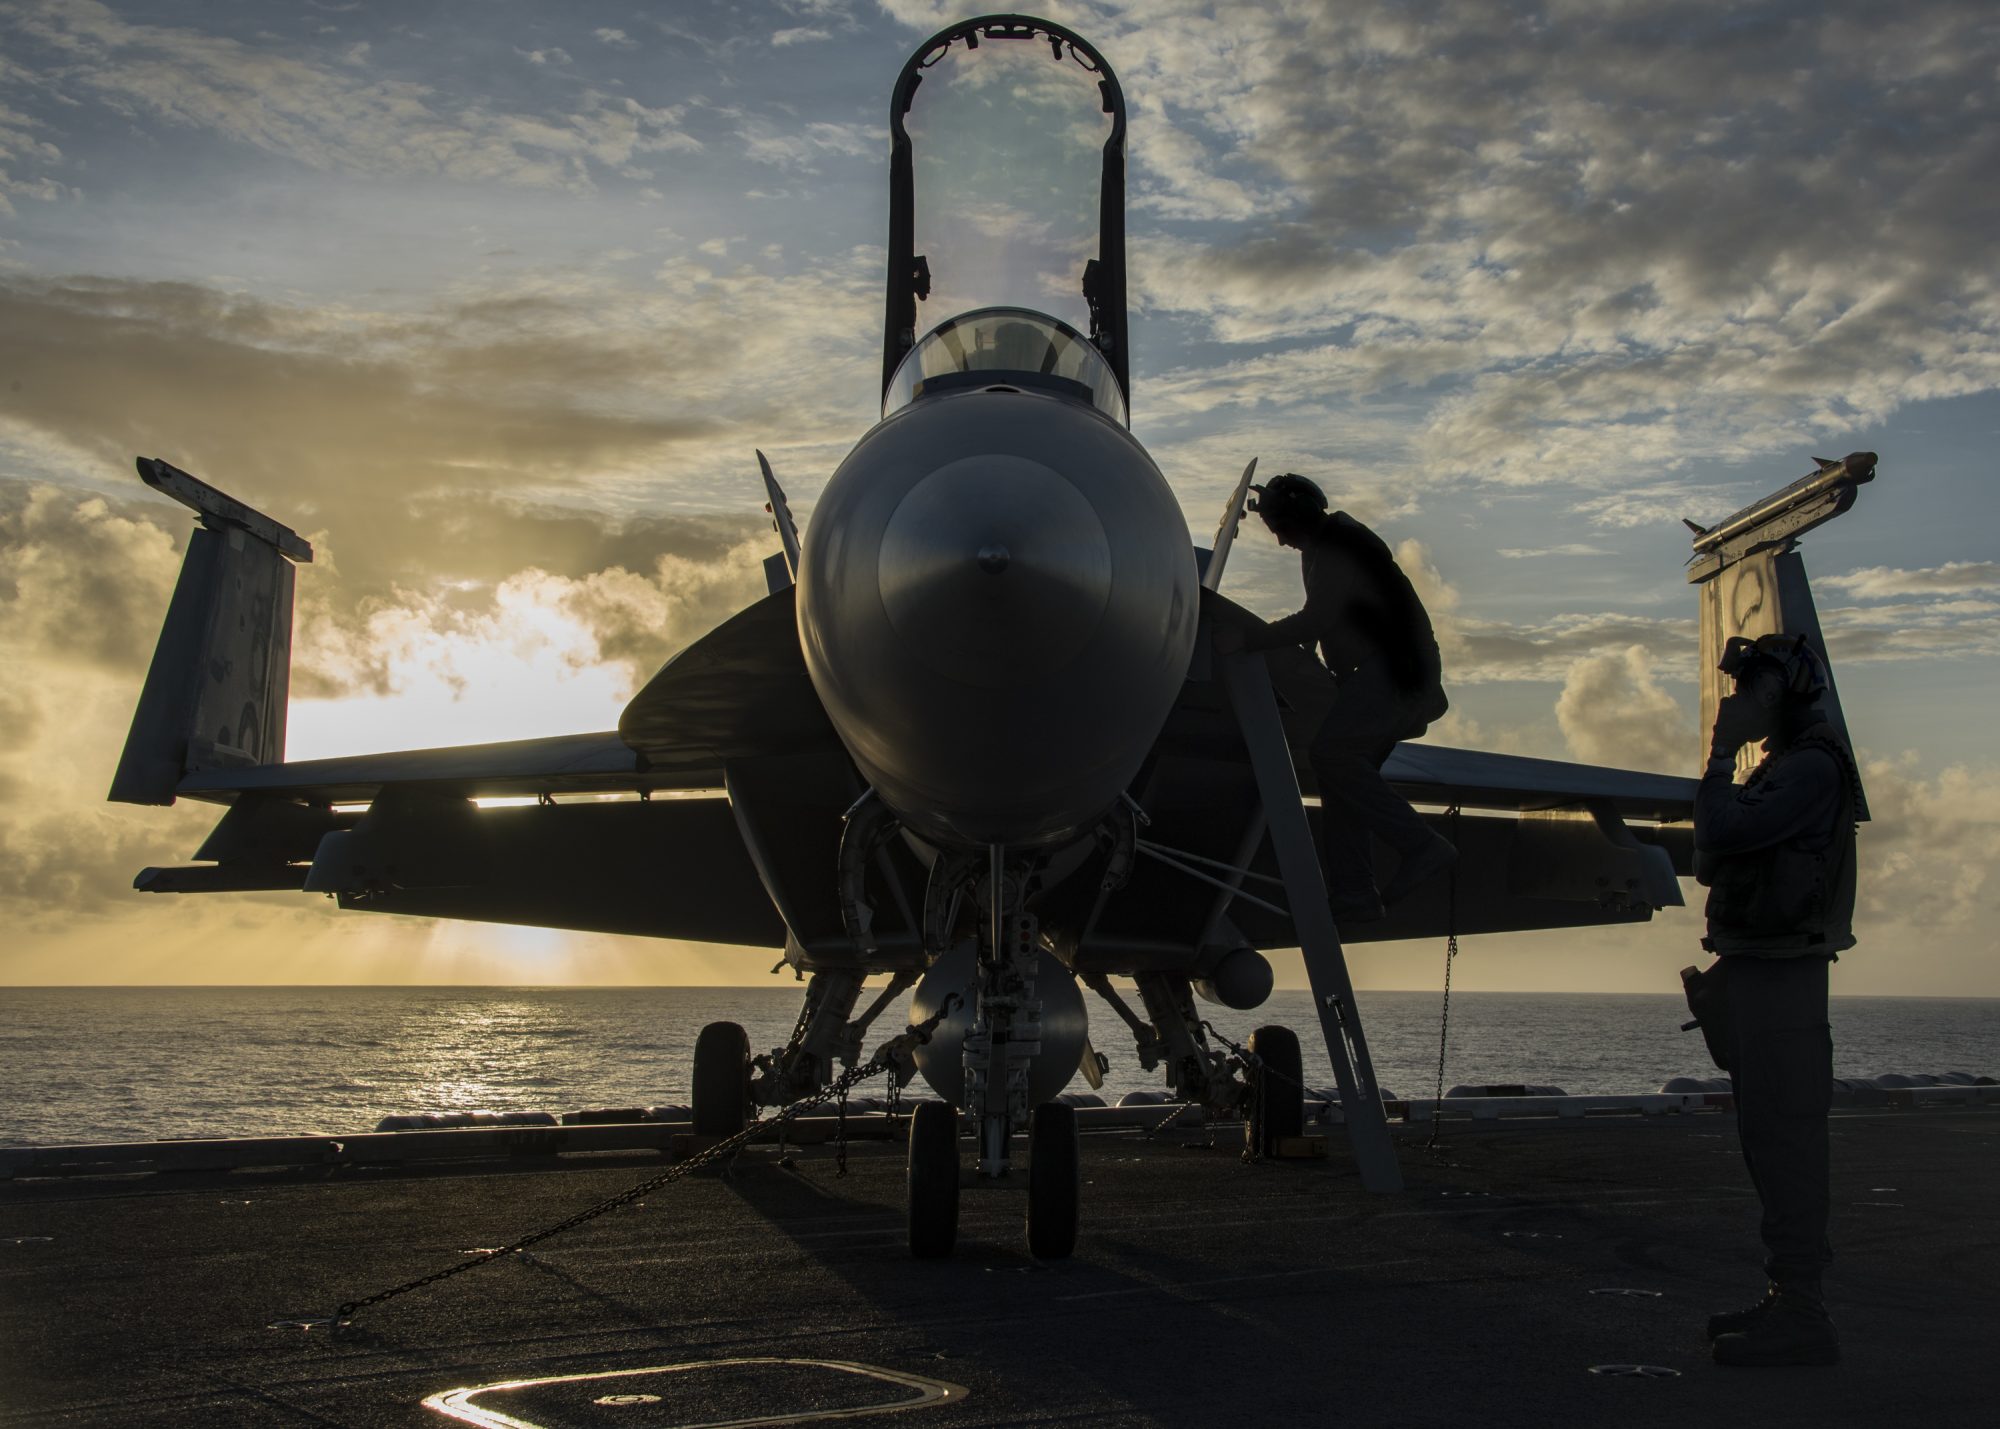 (Feb. 07, 2017) Sailors assigned to the “Kestrels” of Strike Fighter Squadron (VFA) 137, perform checks on an F/A-18E Super Hornet before flight operations on the aircraft carrier USS Carl Vinson (CVN 70) flight deck. The ship and its carrier strike group are on a regularly scheduled Western Pacific deployment as part of the U.S. Pacific Fleet-led initiative to extend the command and control functions of U.S. 3rd Fleet. U.S. Navy aircraft carrier strike groups have patrolled the Indo-Asia-Pacific regularly and routinely for more than 70 years. (U.S. Navy photo by Mass Communication Specialist 2nd Class Sean M. Castellano/Released)